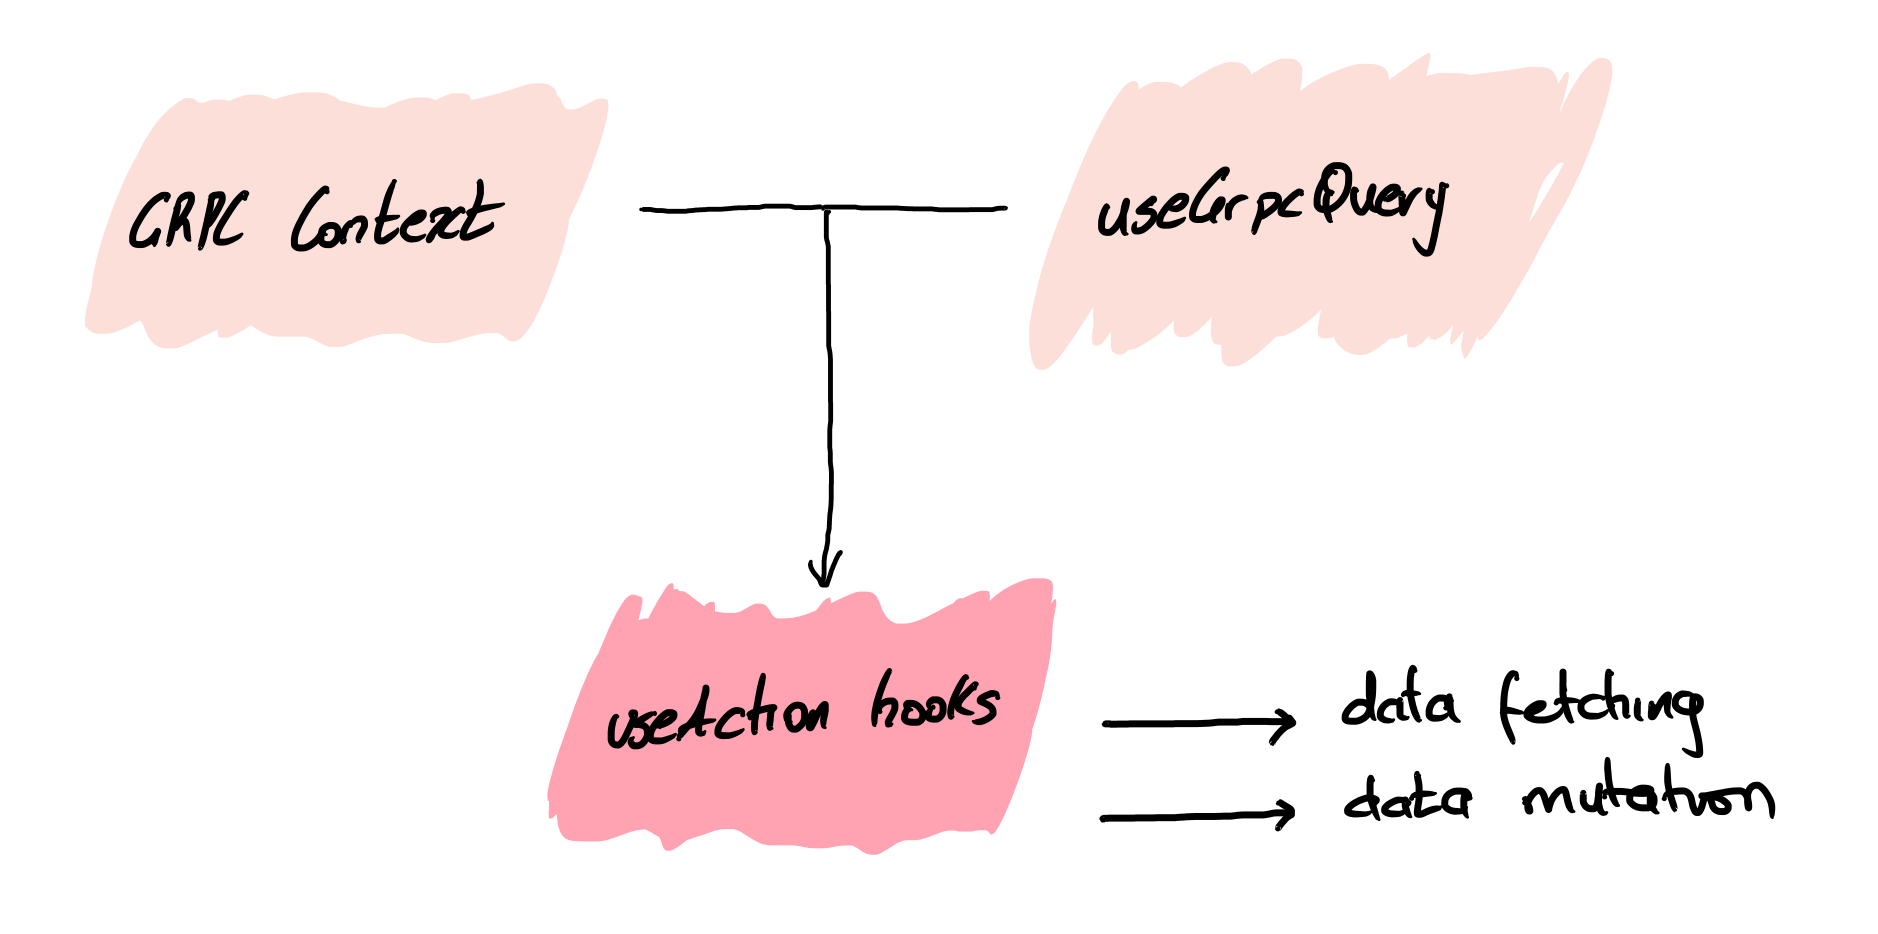 A sketch highlighting how the GrpcContext context file and the useGrpcQuery hook is used in the useAction hooks.